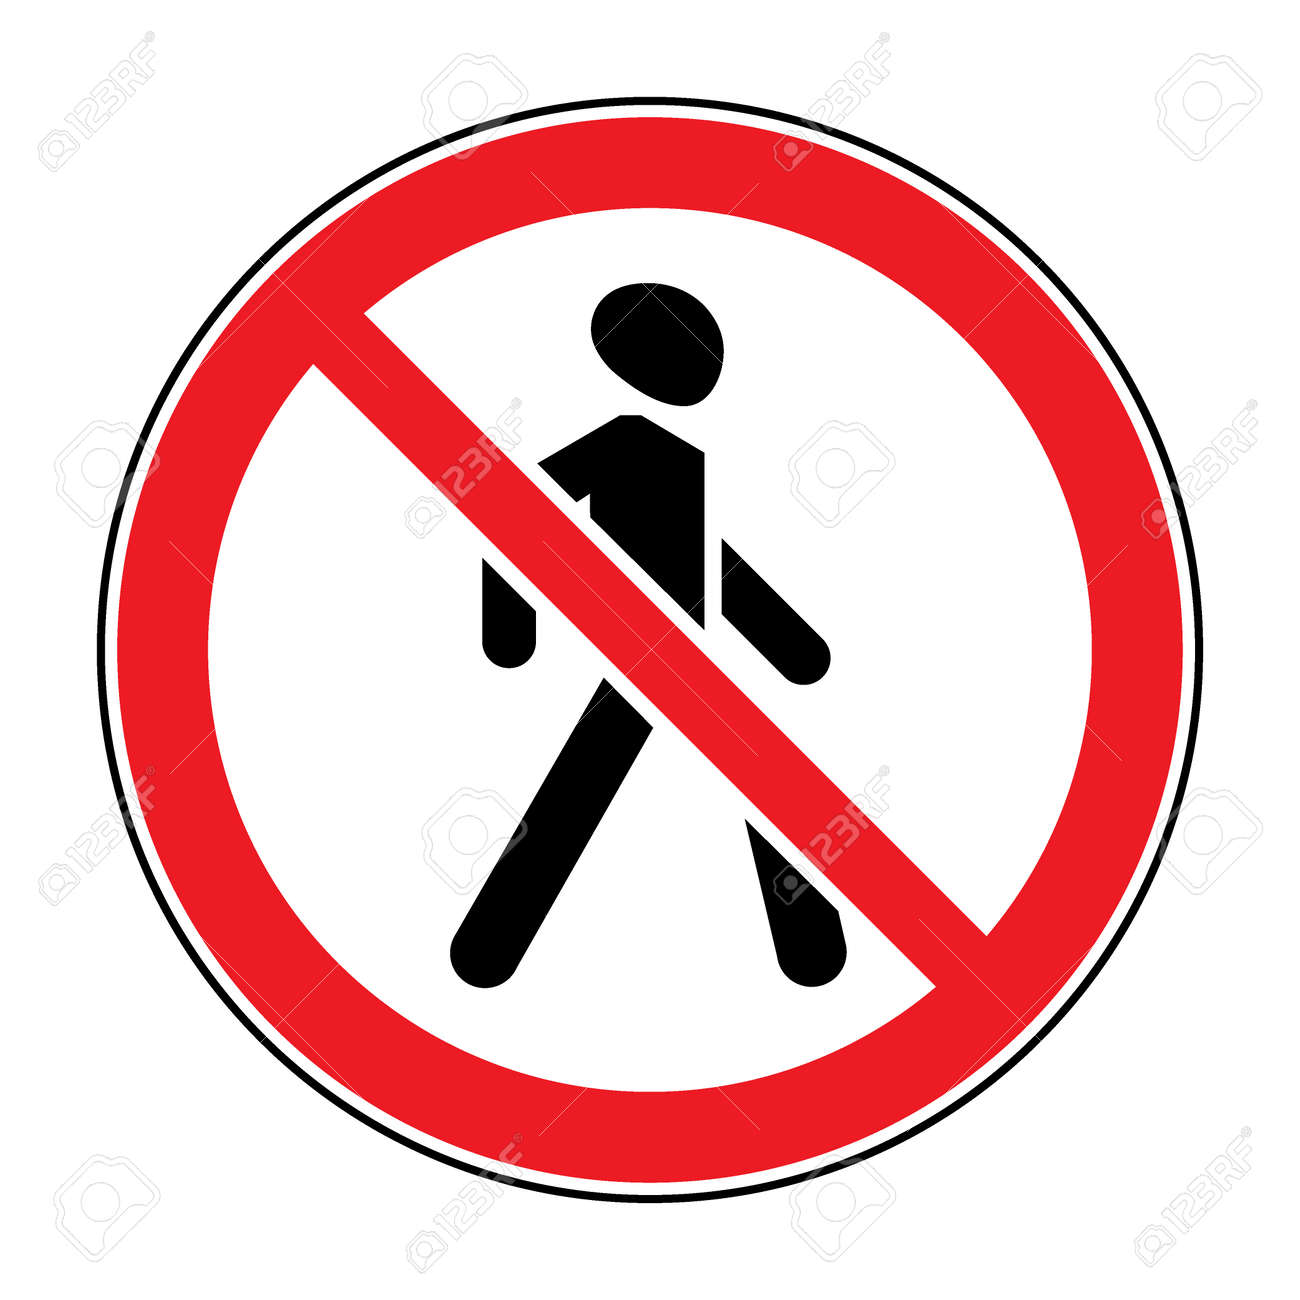 Prohibition no pedestrian sign no walking traffic sign no crossing prohibited signs silhouette of walking man isolated on white background stock illustration you can change color and size stock photo picture and